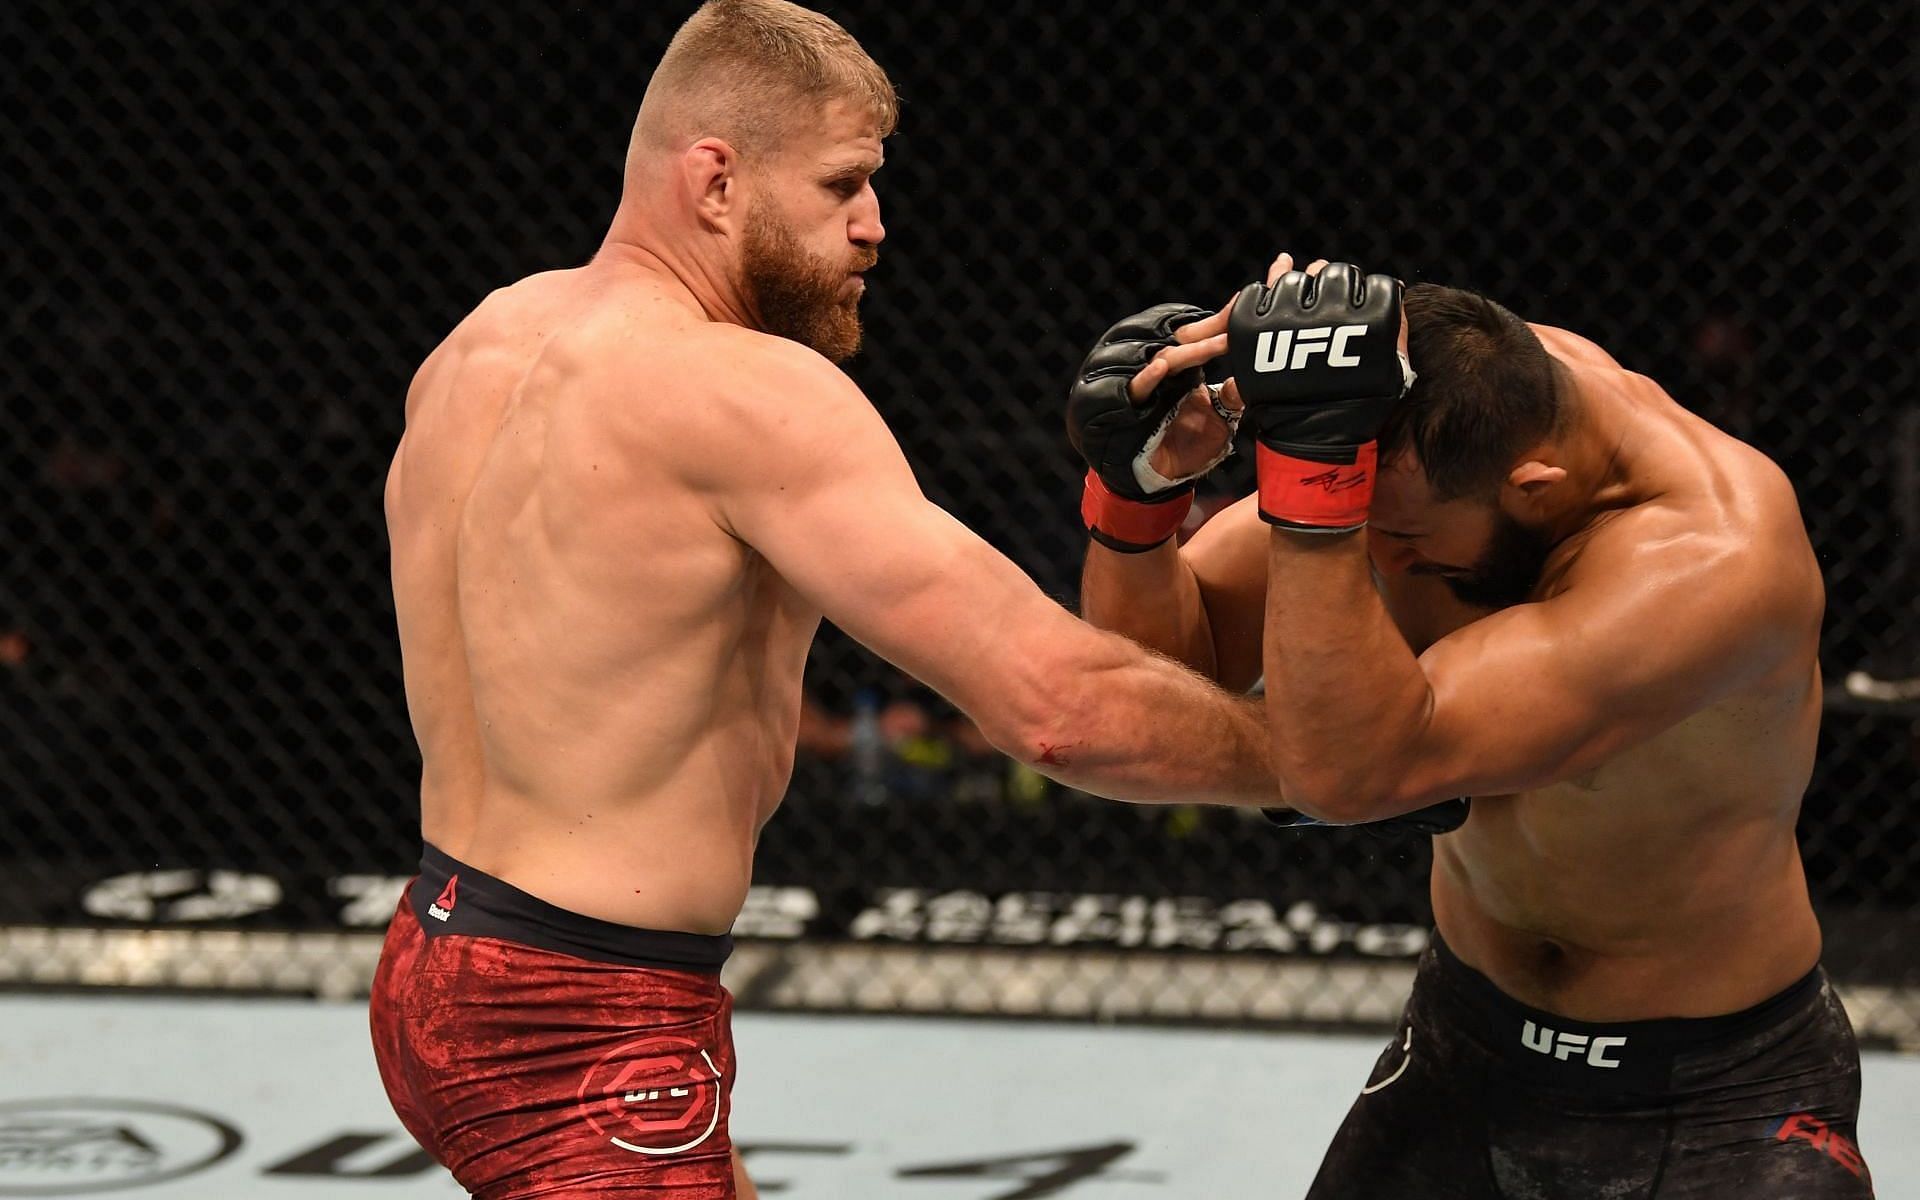 5 reasons why the light heavyweight division is one of the most exciting in the UFC